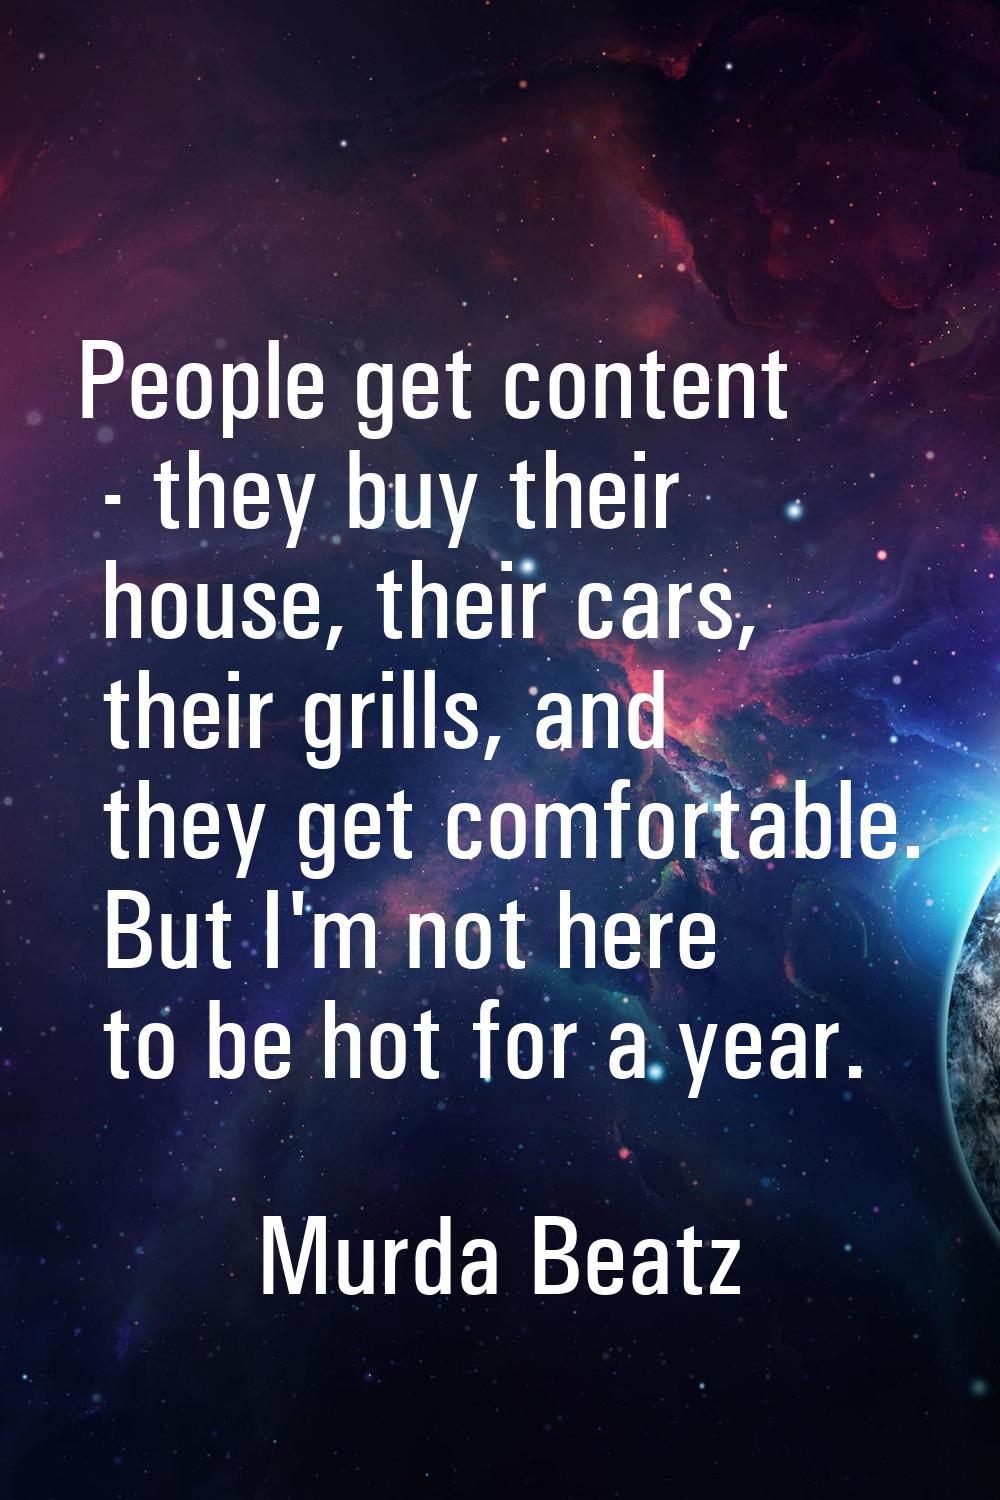 People get content - they buy their house, their cars, their grills, and they get comfortable. But 